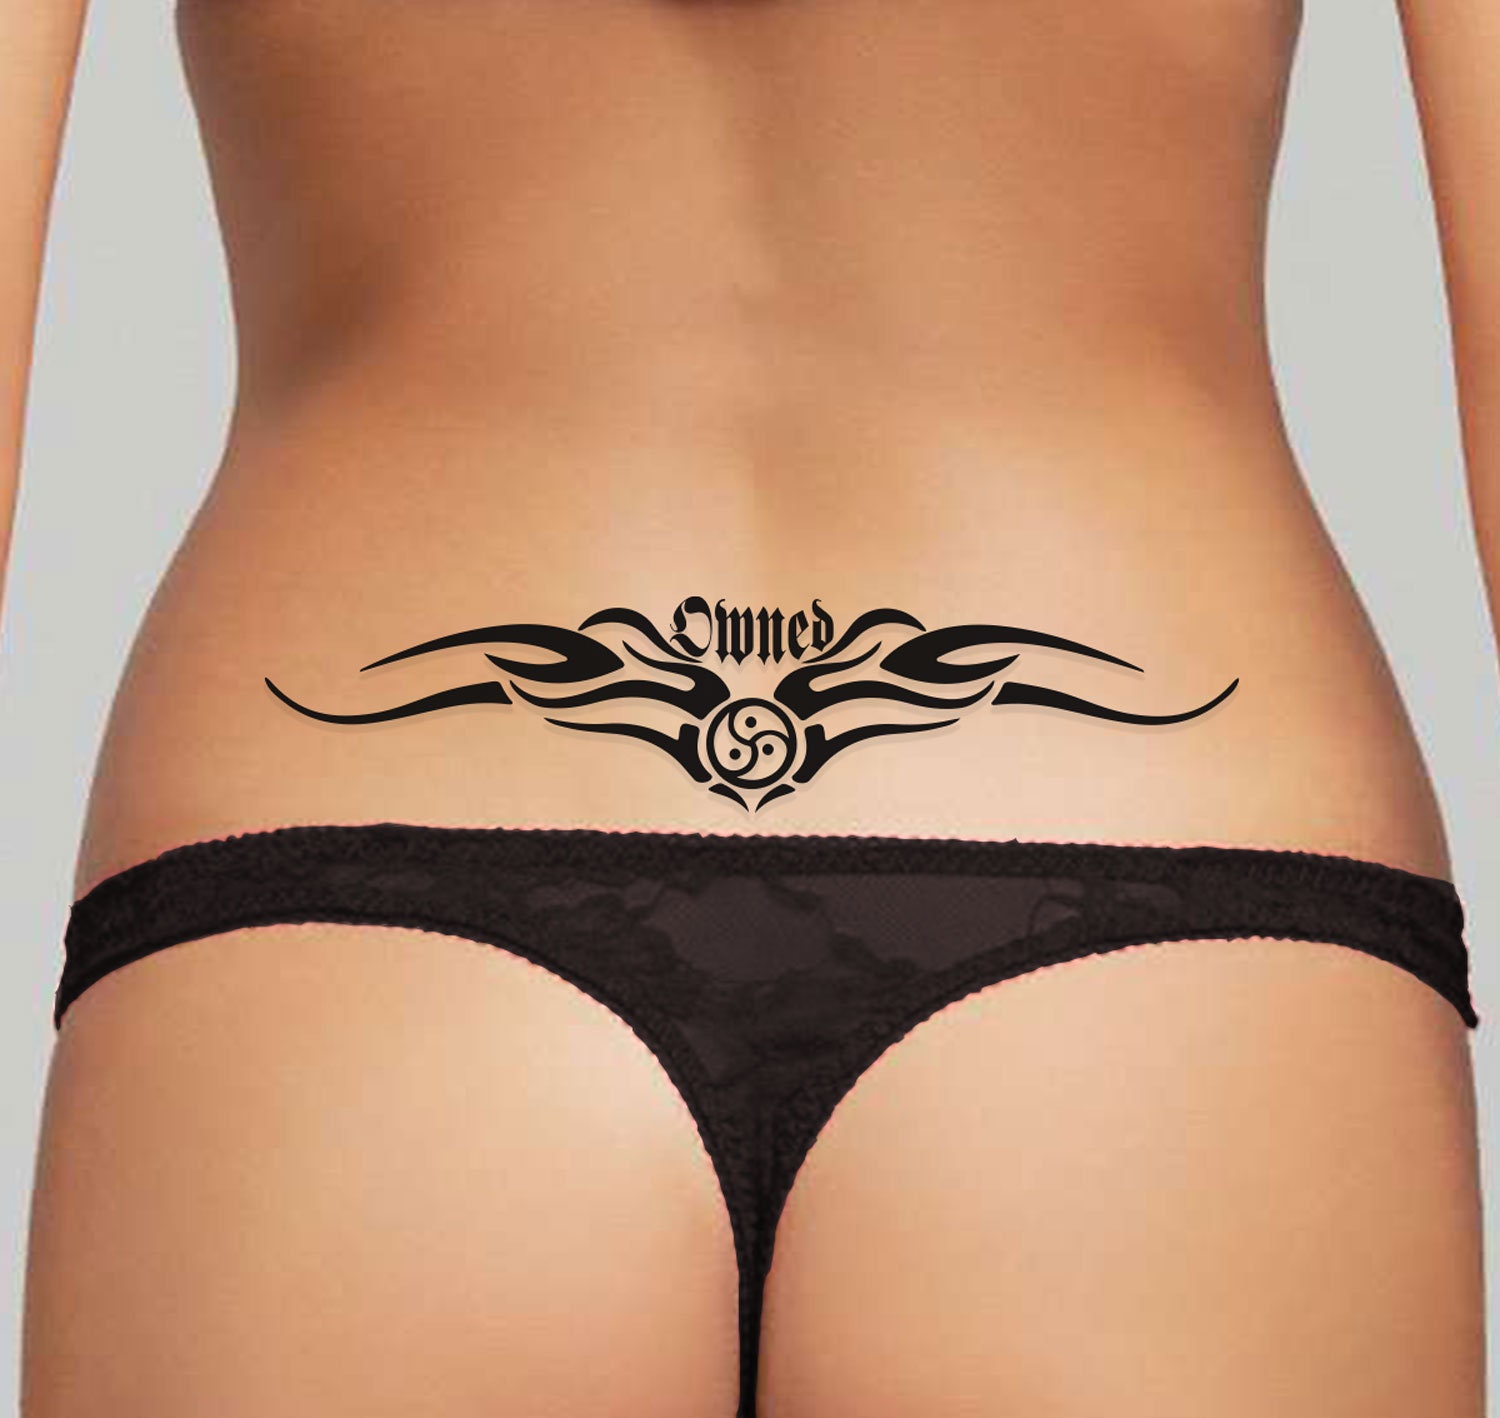 3x Adult Lower Back Temporary Tattoos Tramp Stamps BDSM pic image